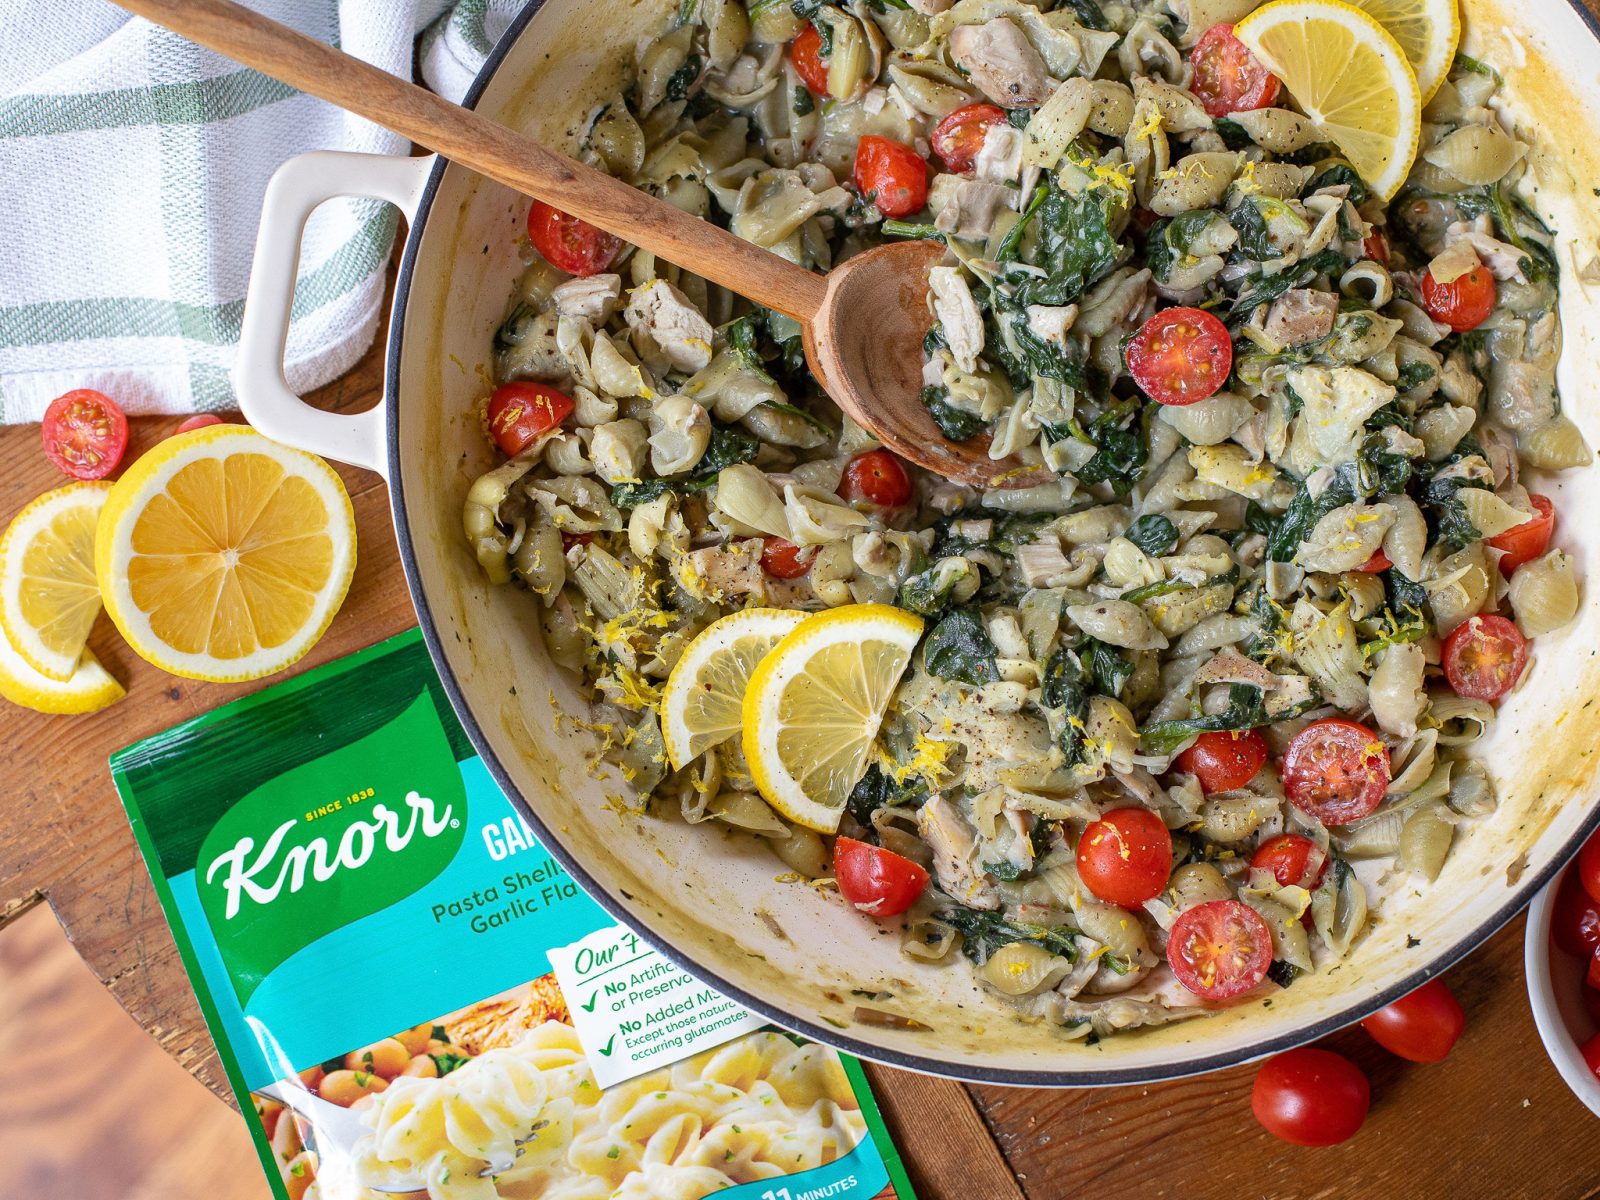 Shake Up Dinnertime With My Creamy Garlic Shells With Chicken, Artichokes & Spinach – Perfect Meal To Go With The Knorr BOGO Sale!